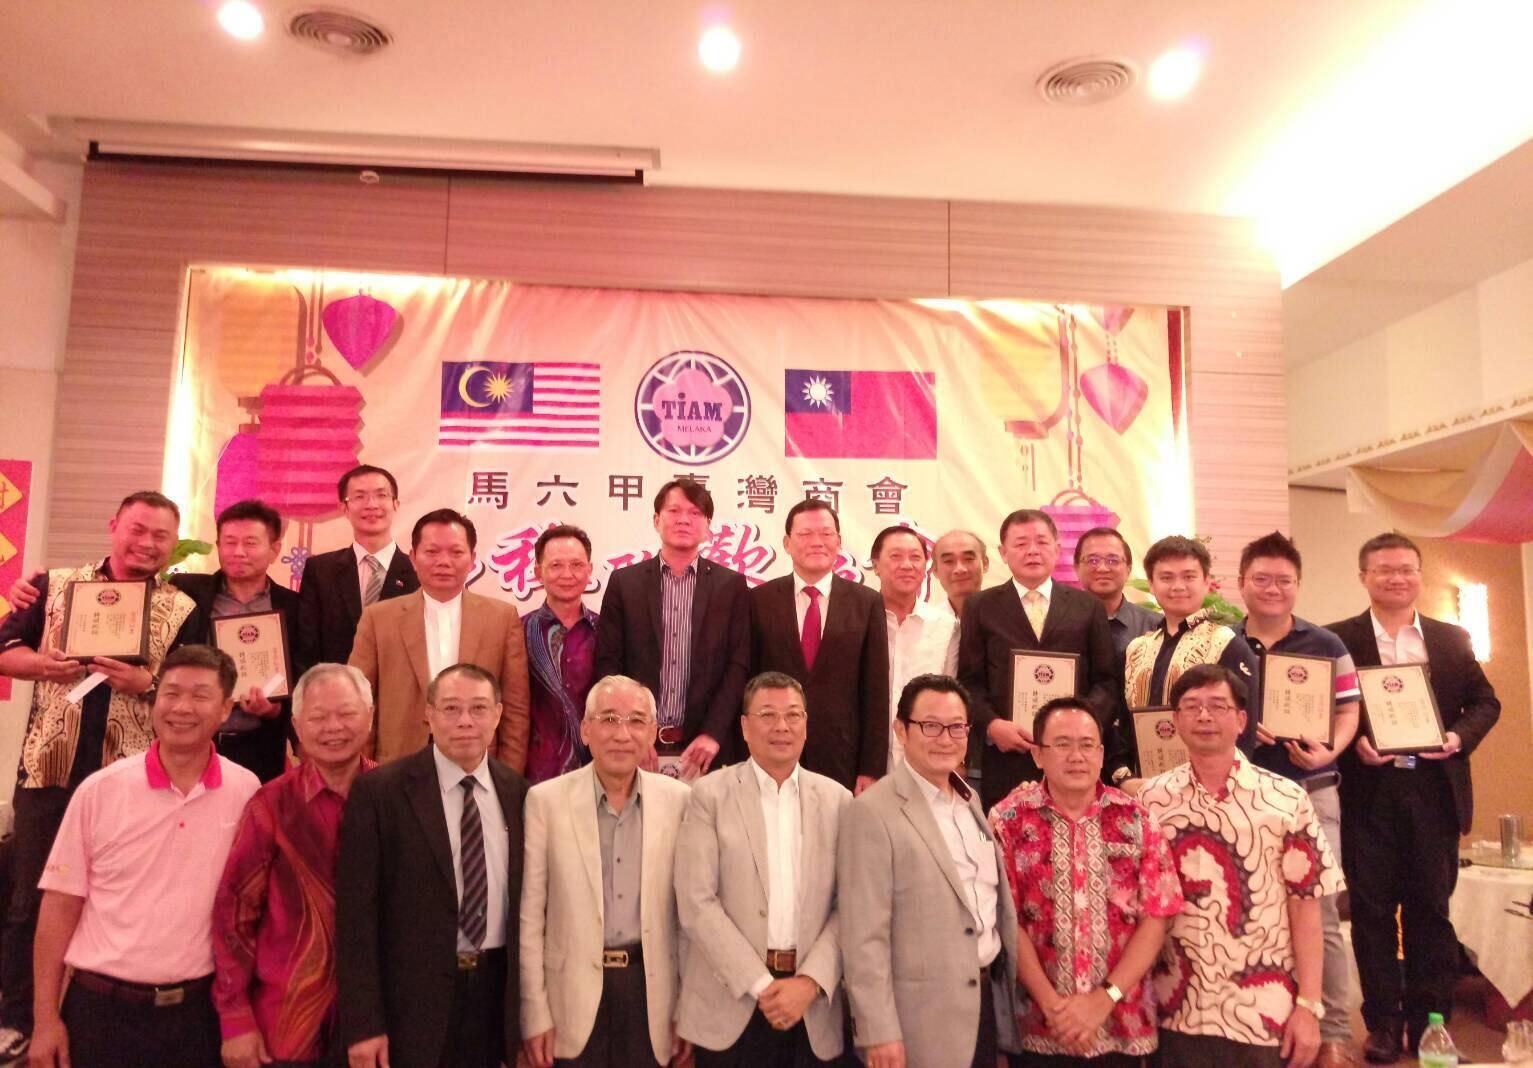 Representative Chang, James Chi-Ping (secong row, 8th from right) with Melaka Standing Committee, Persident Jasin Wu and the all council take photograph.
